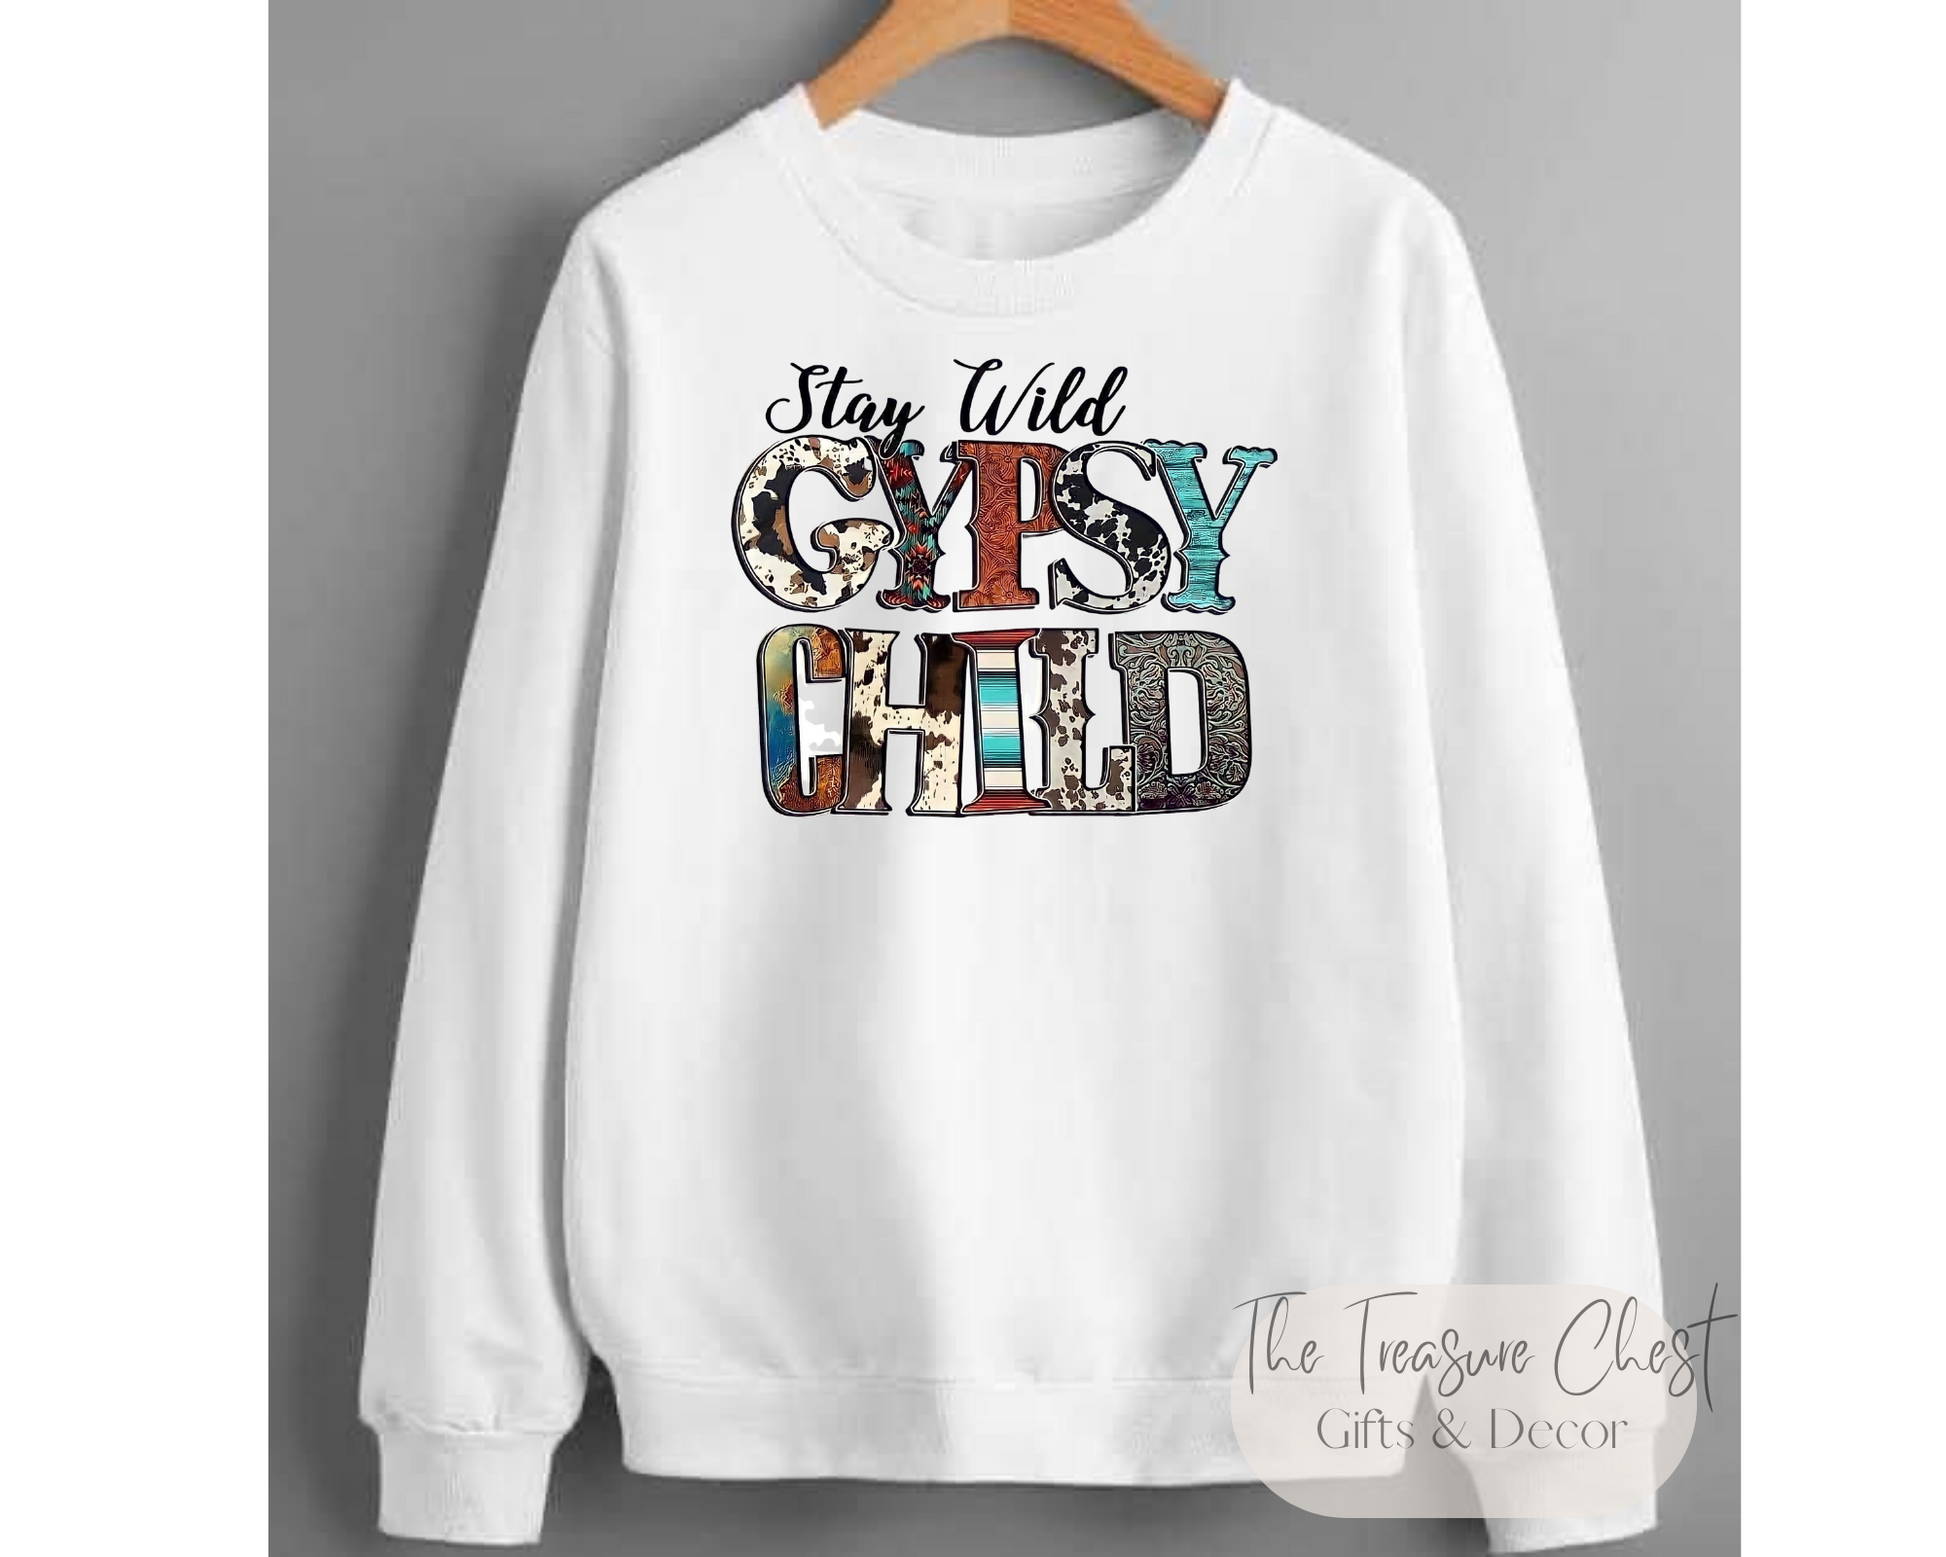 Introducing the Stay Wild Gypsy Child Crewneck Sweatshirt - the perfect way to express your wild side! This cozy and stylish sweatshirt features a classic crewneck cut that's perfect for layering over any outfit. It's made from a high-quality cotton-poly blend for a comfortable fit that's both warm and breathable. White in colour